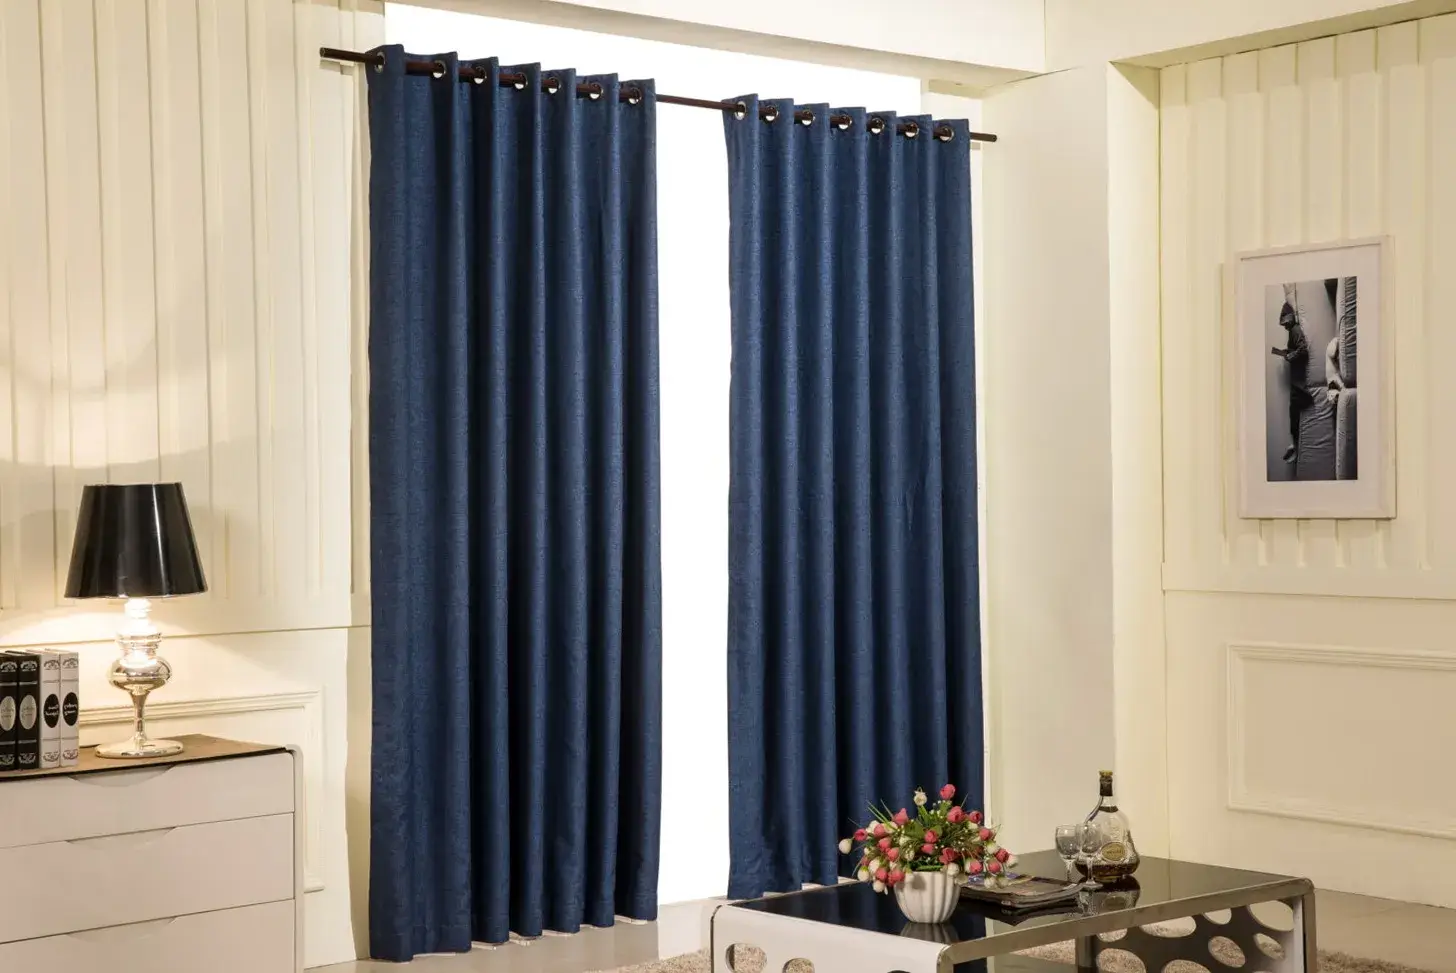 Unraveling the Top 5 Remote Control Curtains for Effortless Elegance